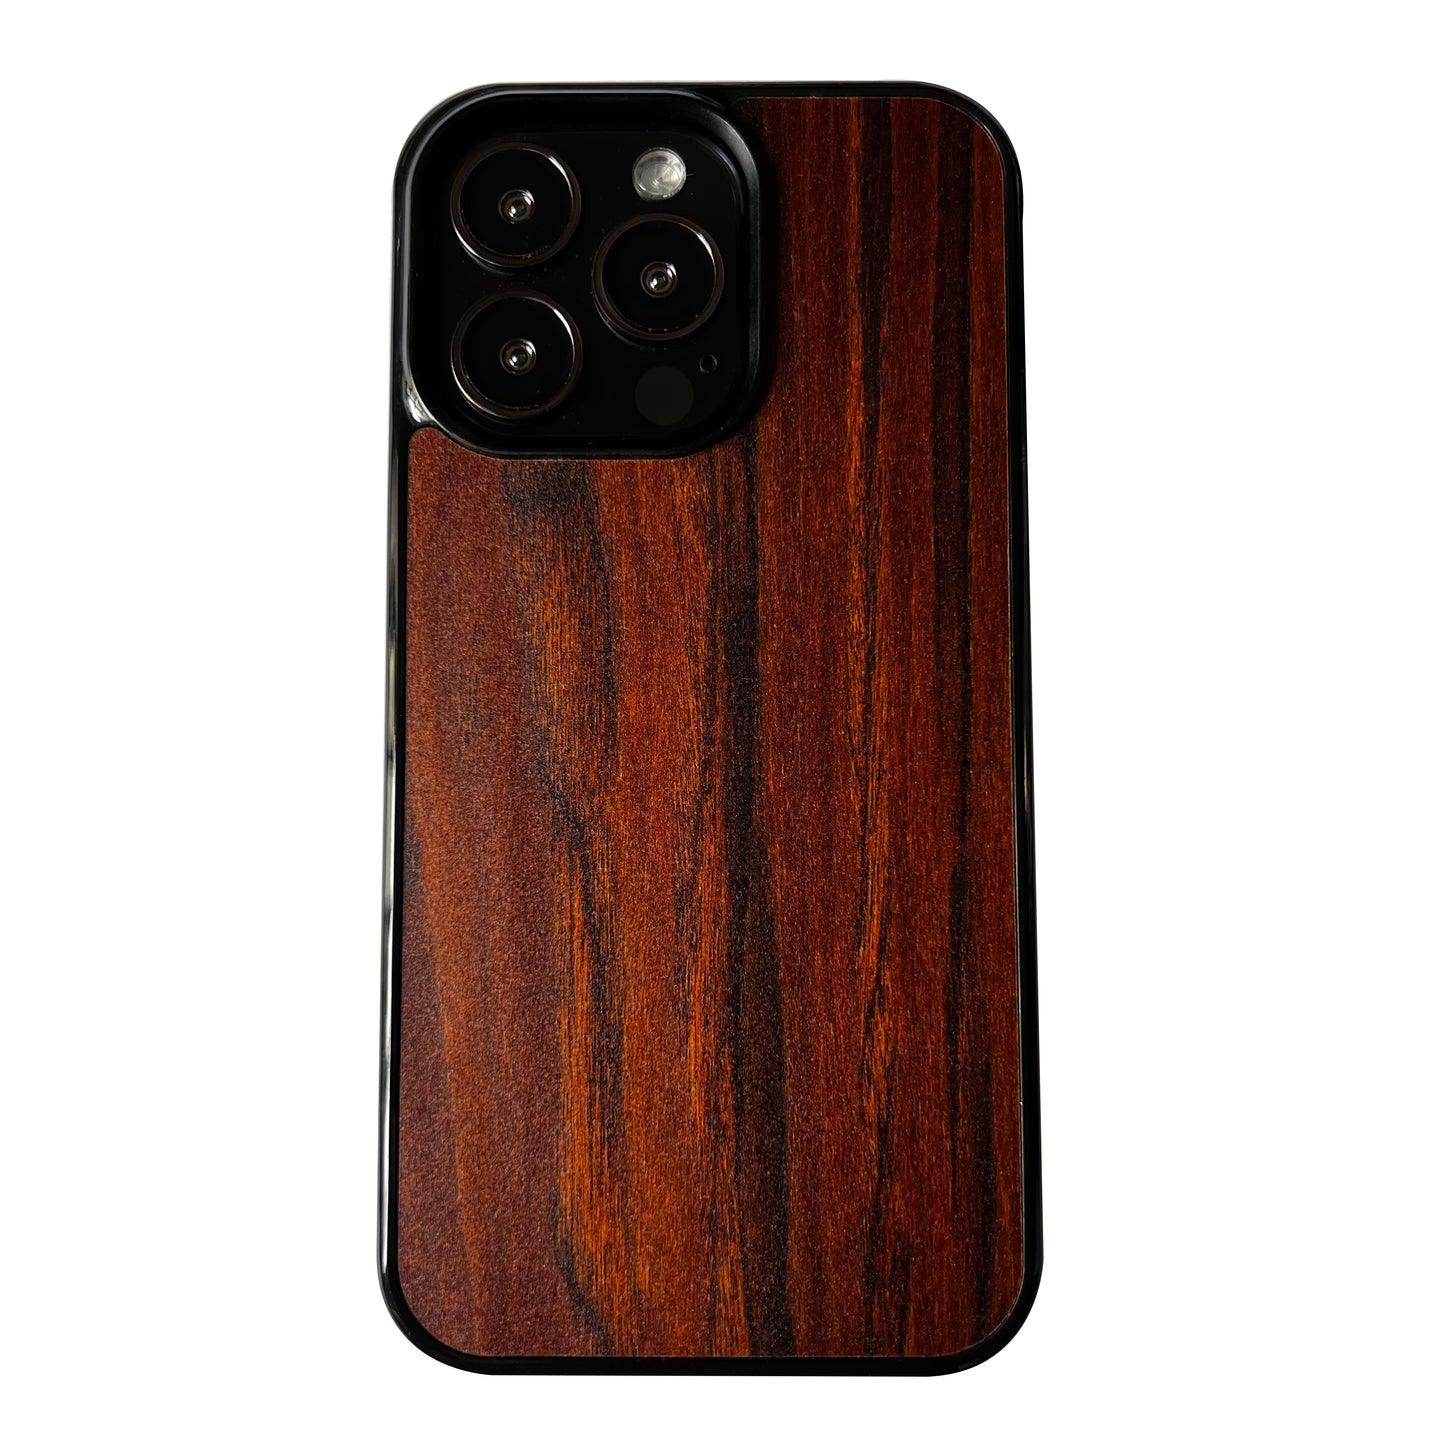 Molzar Grip Series Magnetic Case for iPhone 13 Pro with MagSafe, Aramid Fiber/Ebony Wood